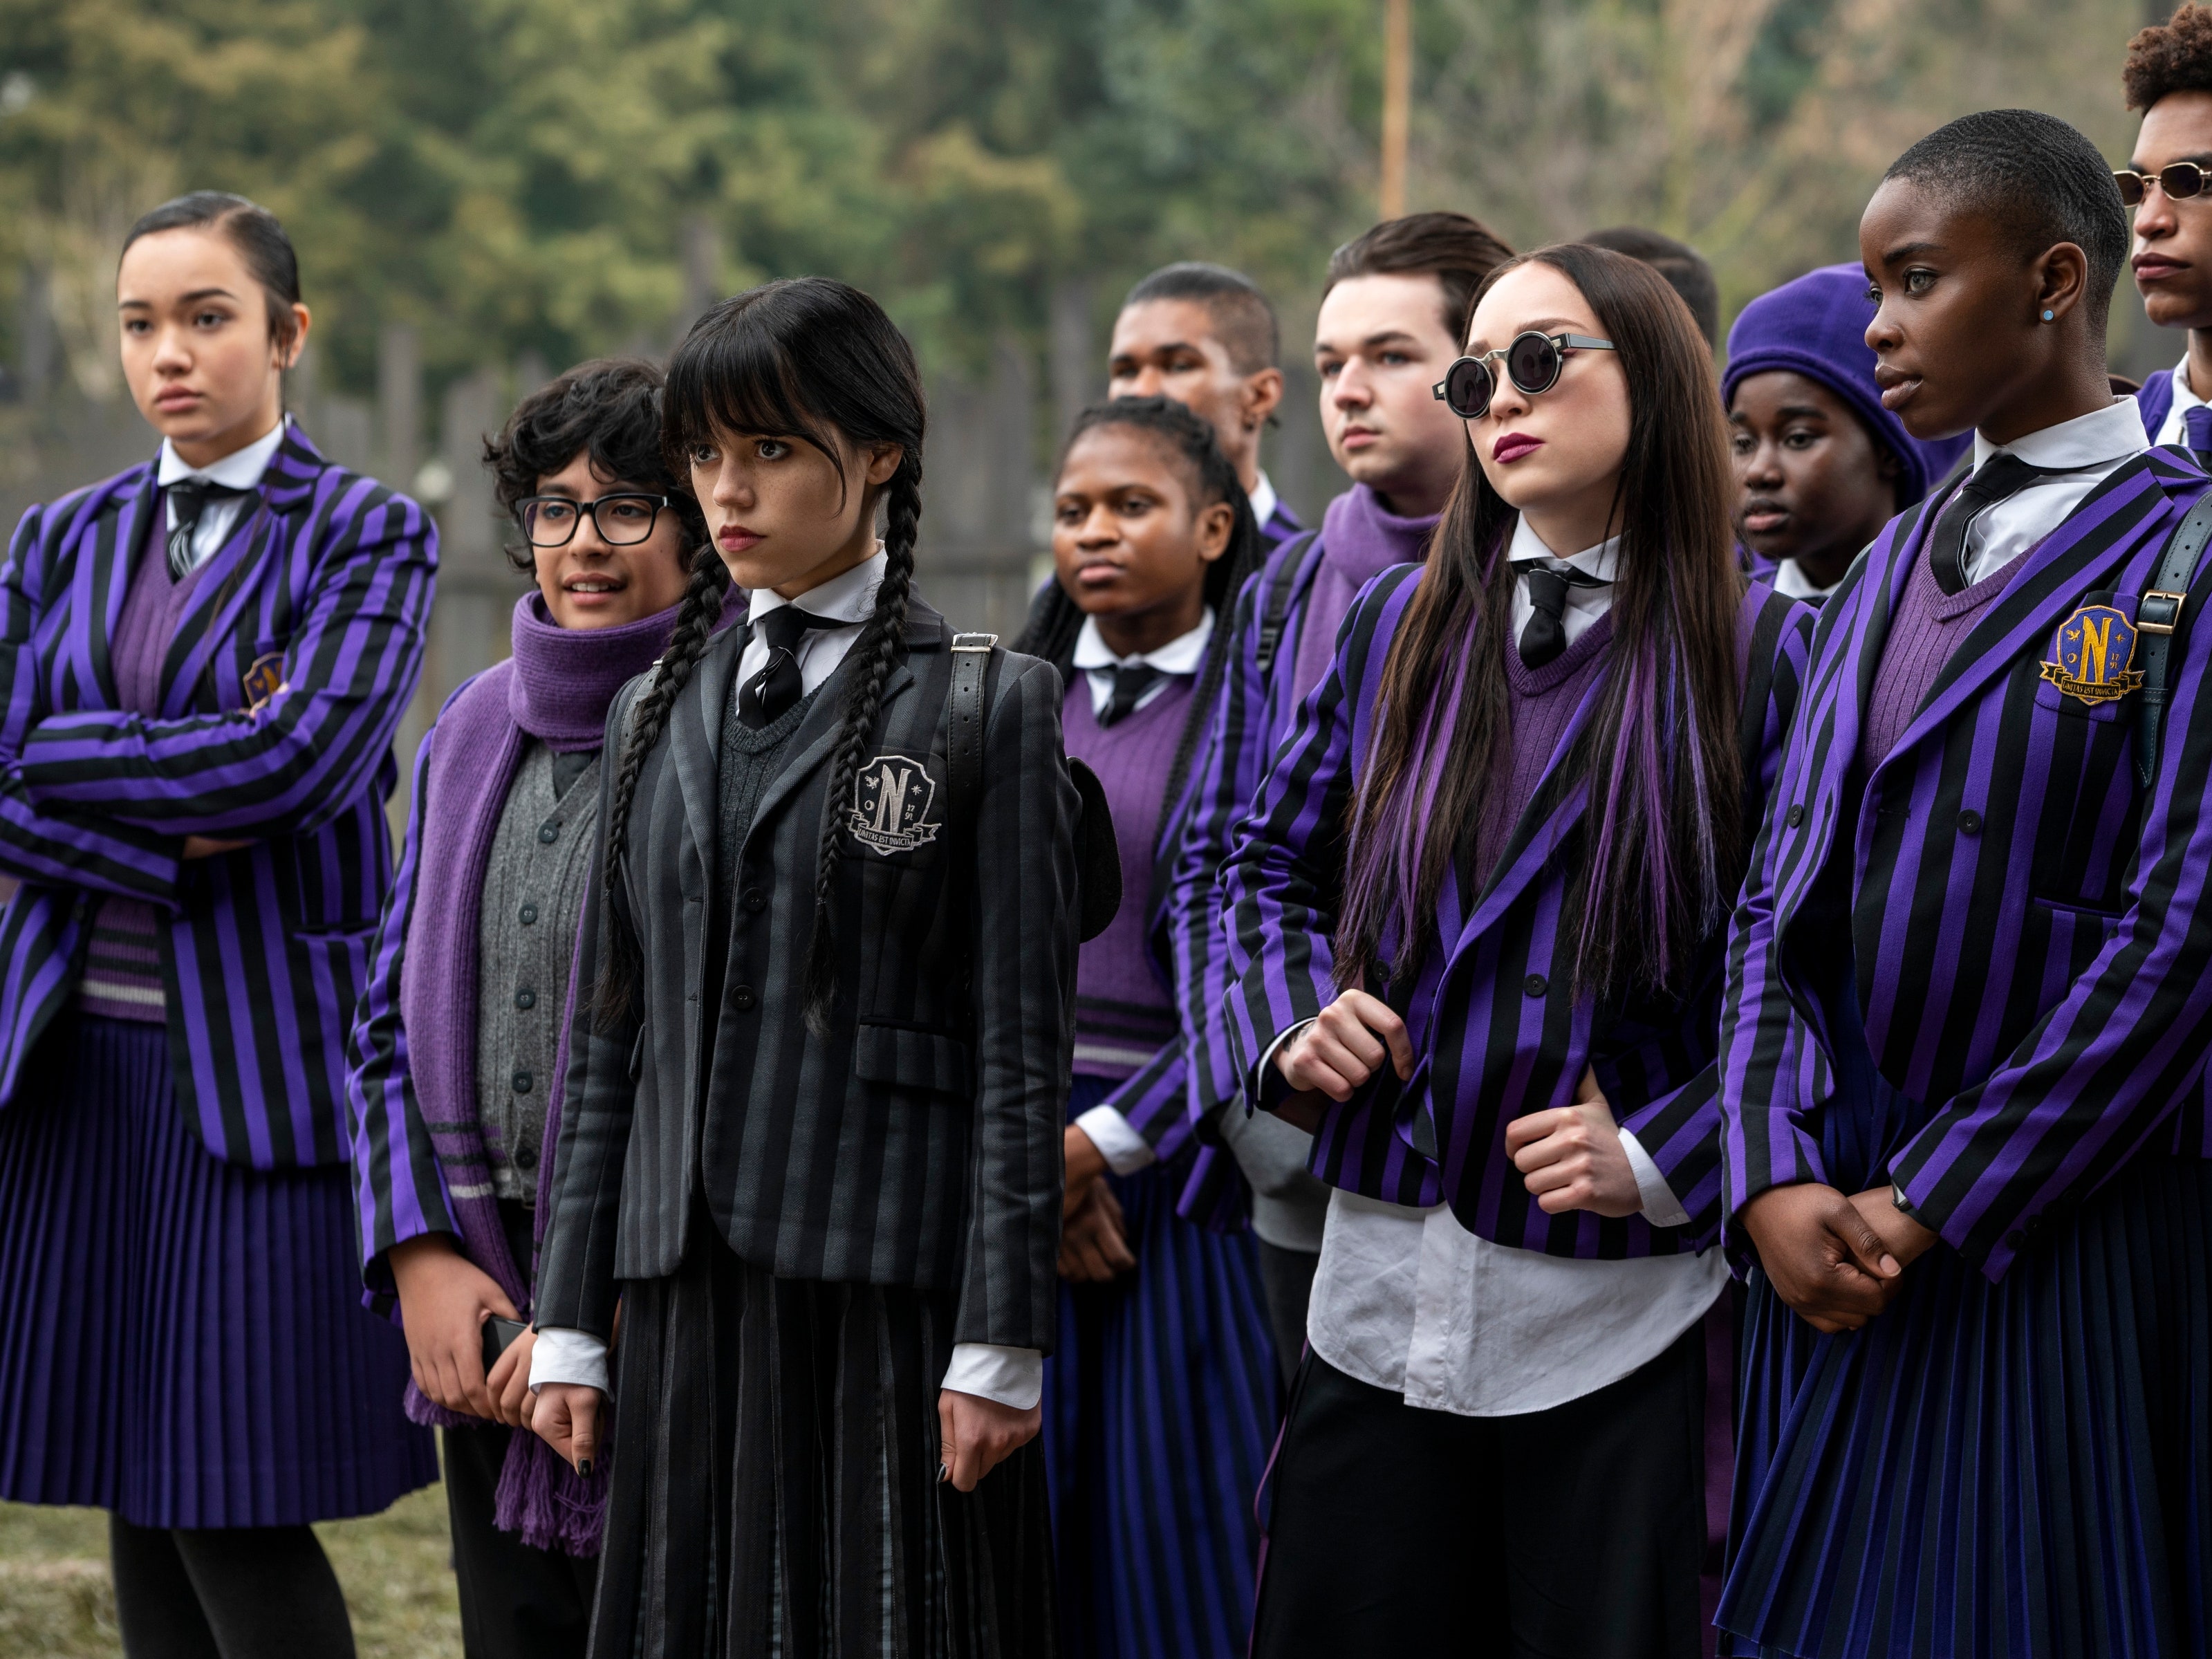 Netflix's “Wednesday” Launches Nevermore Academy Experience Ahead of Release Date